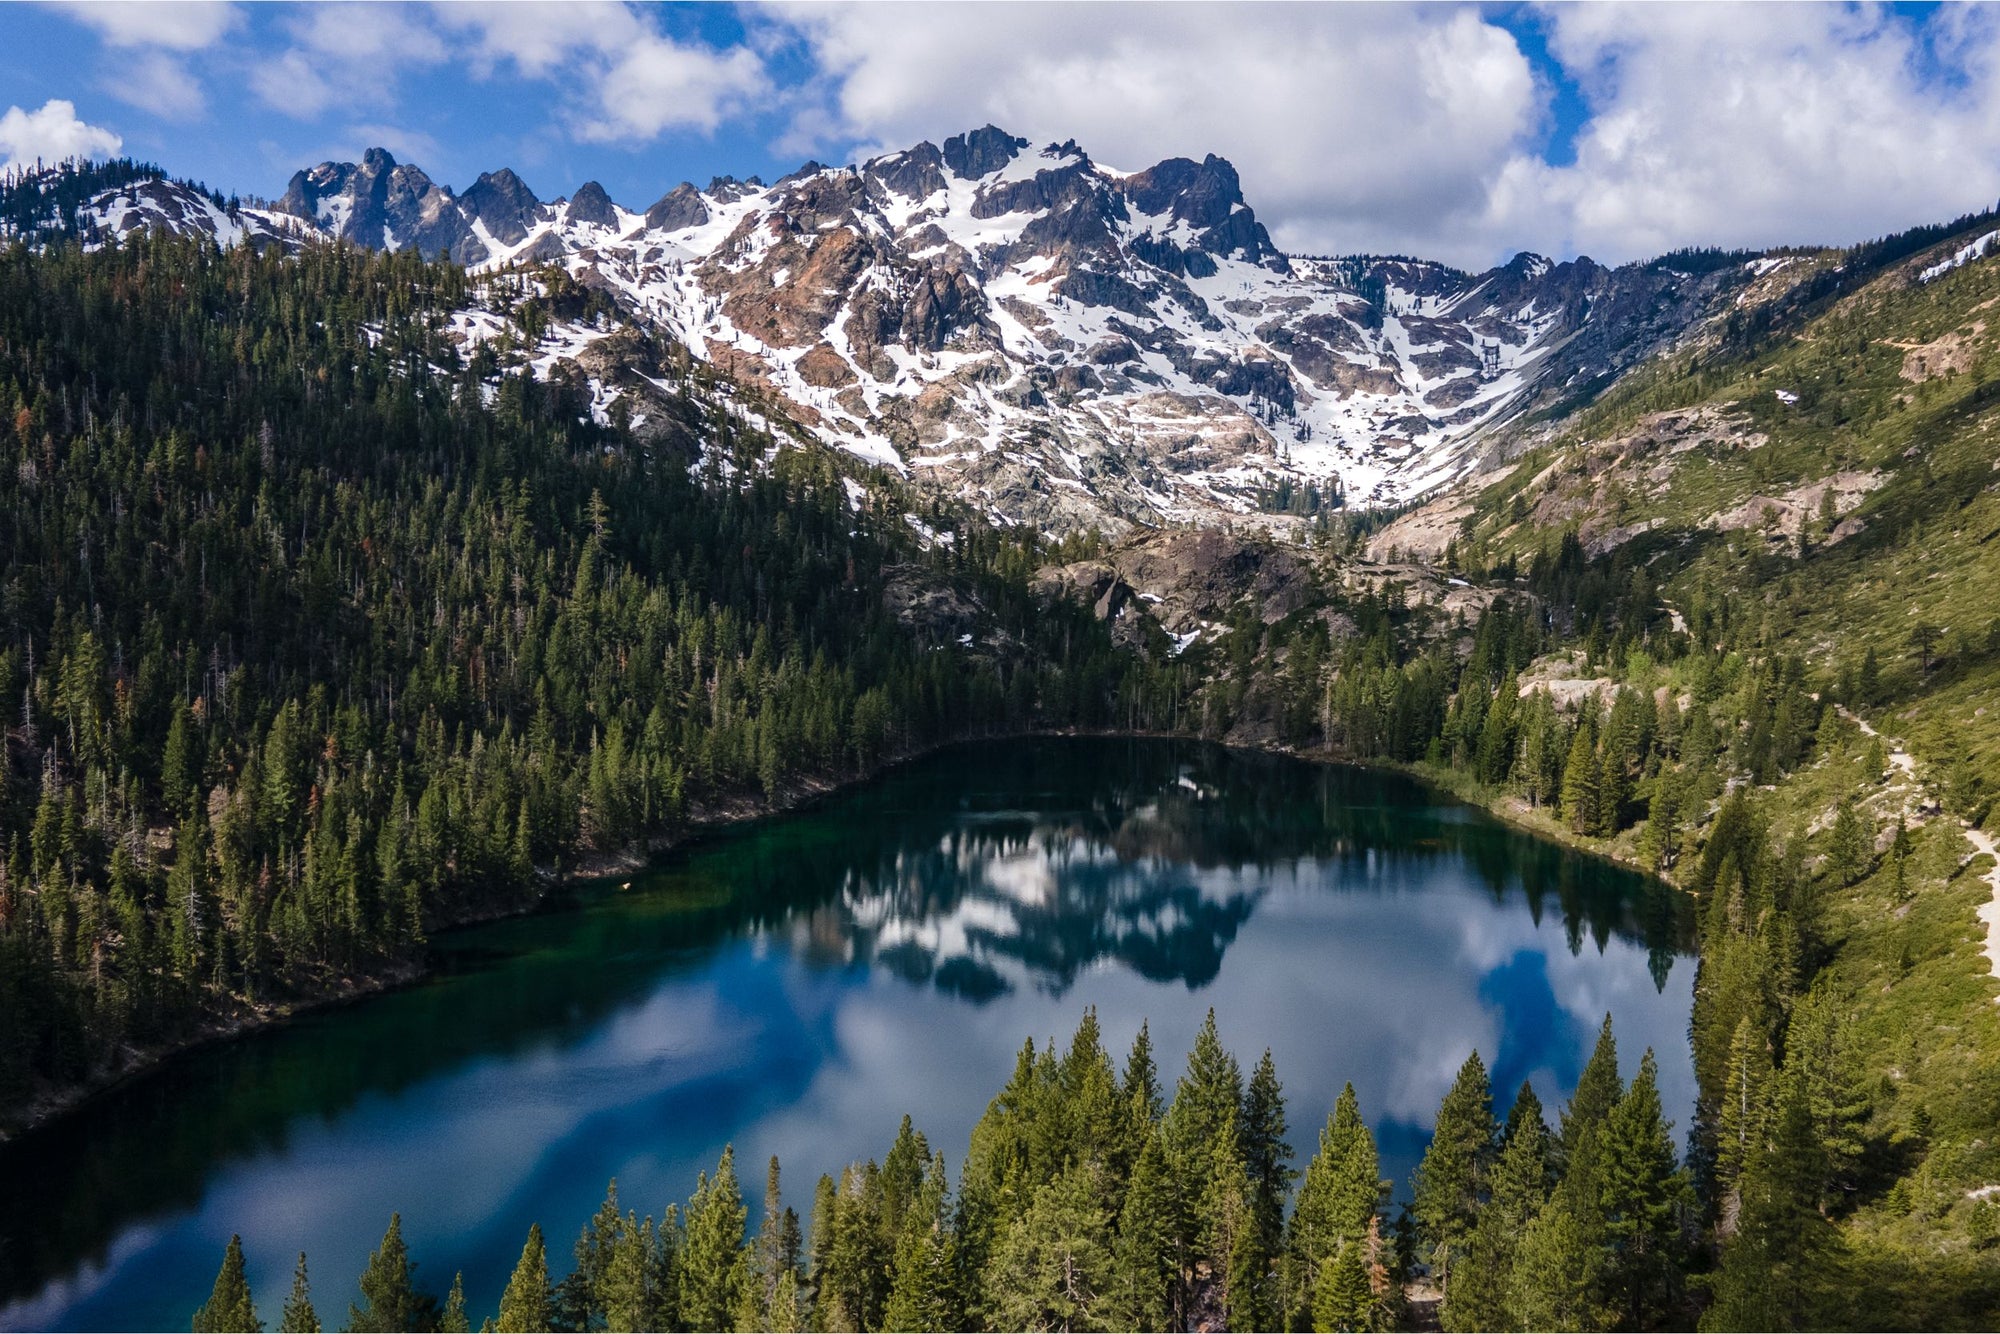 Mountain peaks capped with snow are reflected in an alpine lake lined with tall pine trees.